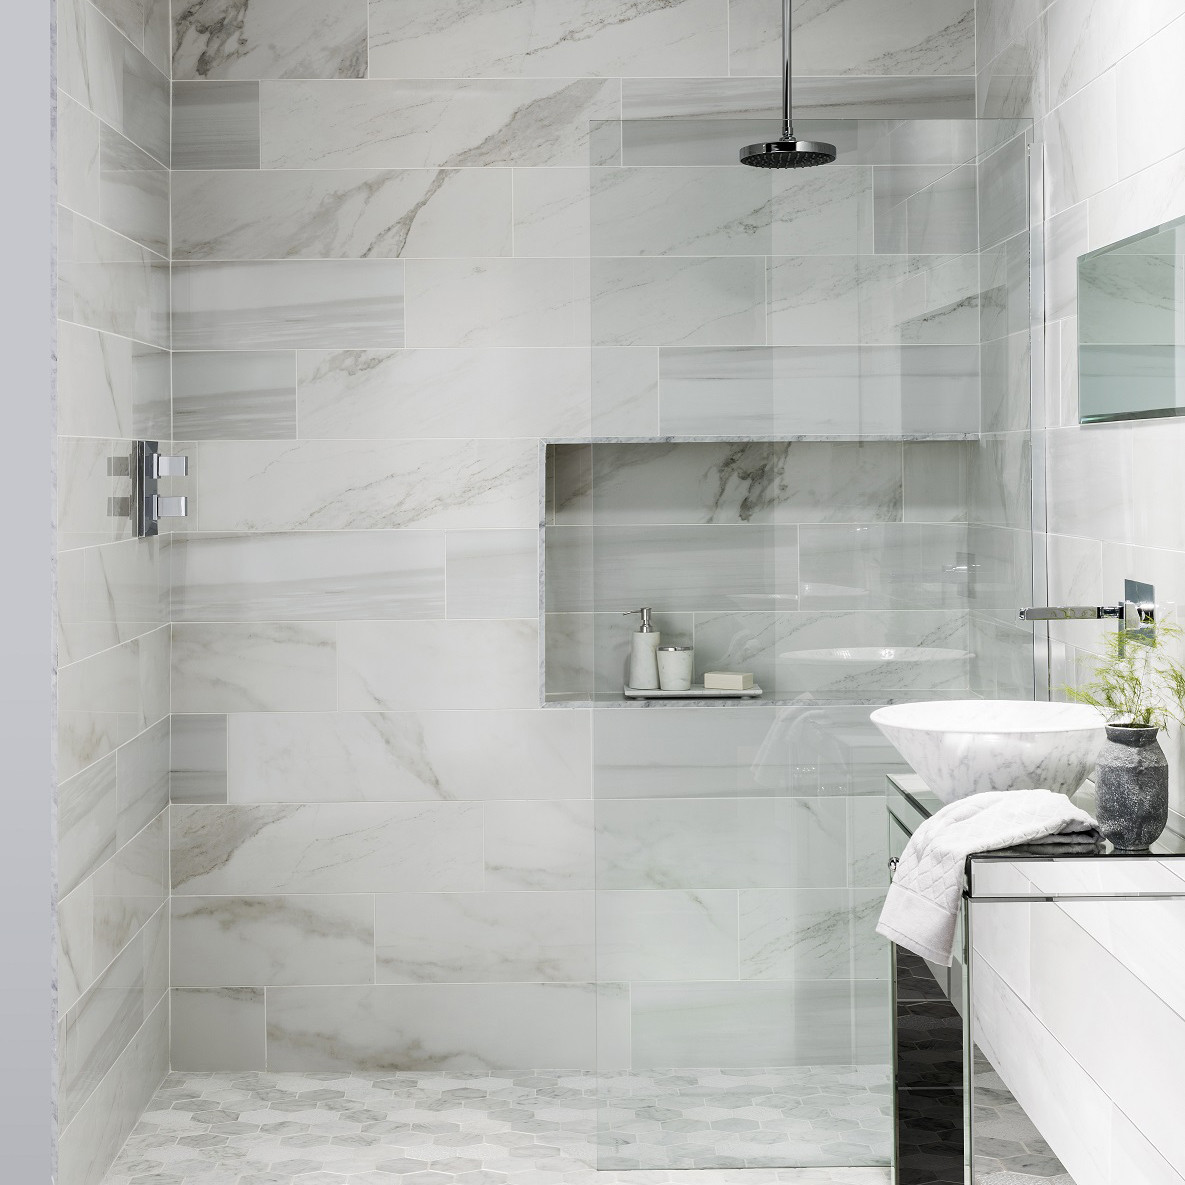 Faux Marble Tile Bathroom
 These faux marble tiles have got everyone talking